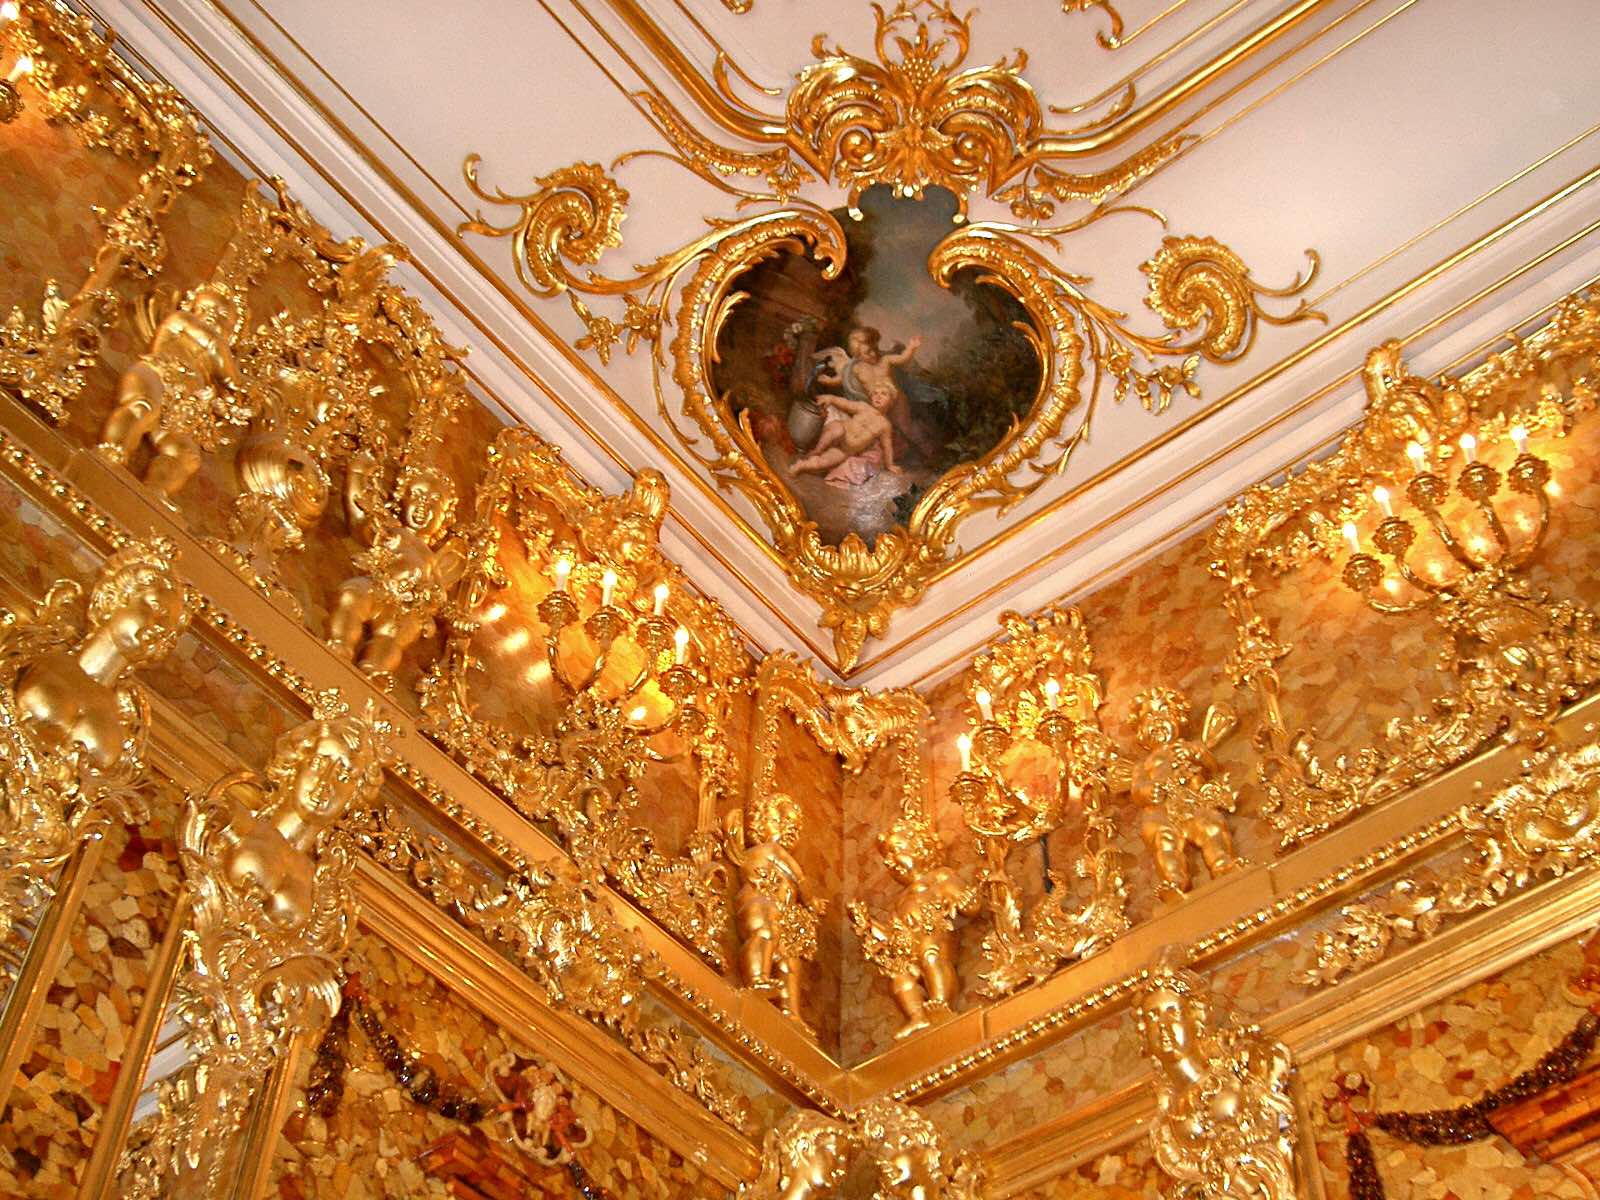 A photograph of the replica of the Amber room.